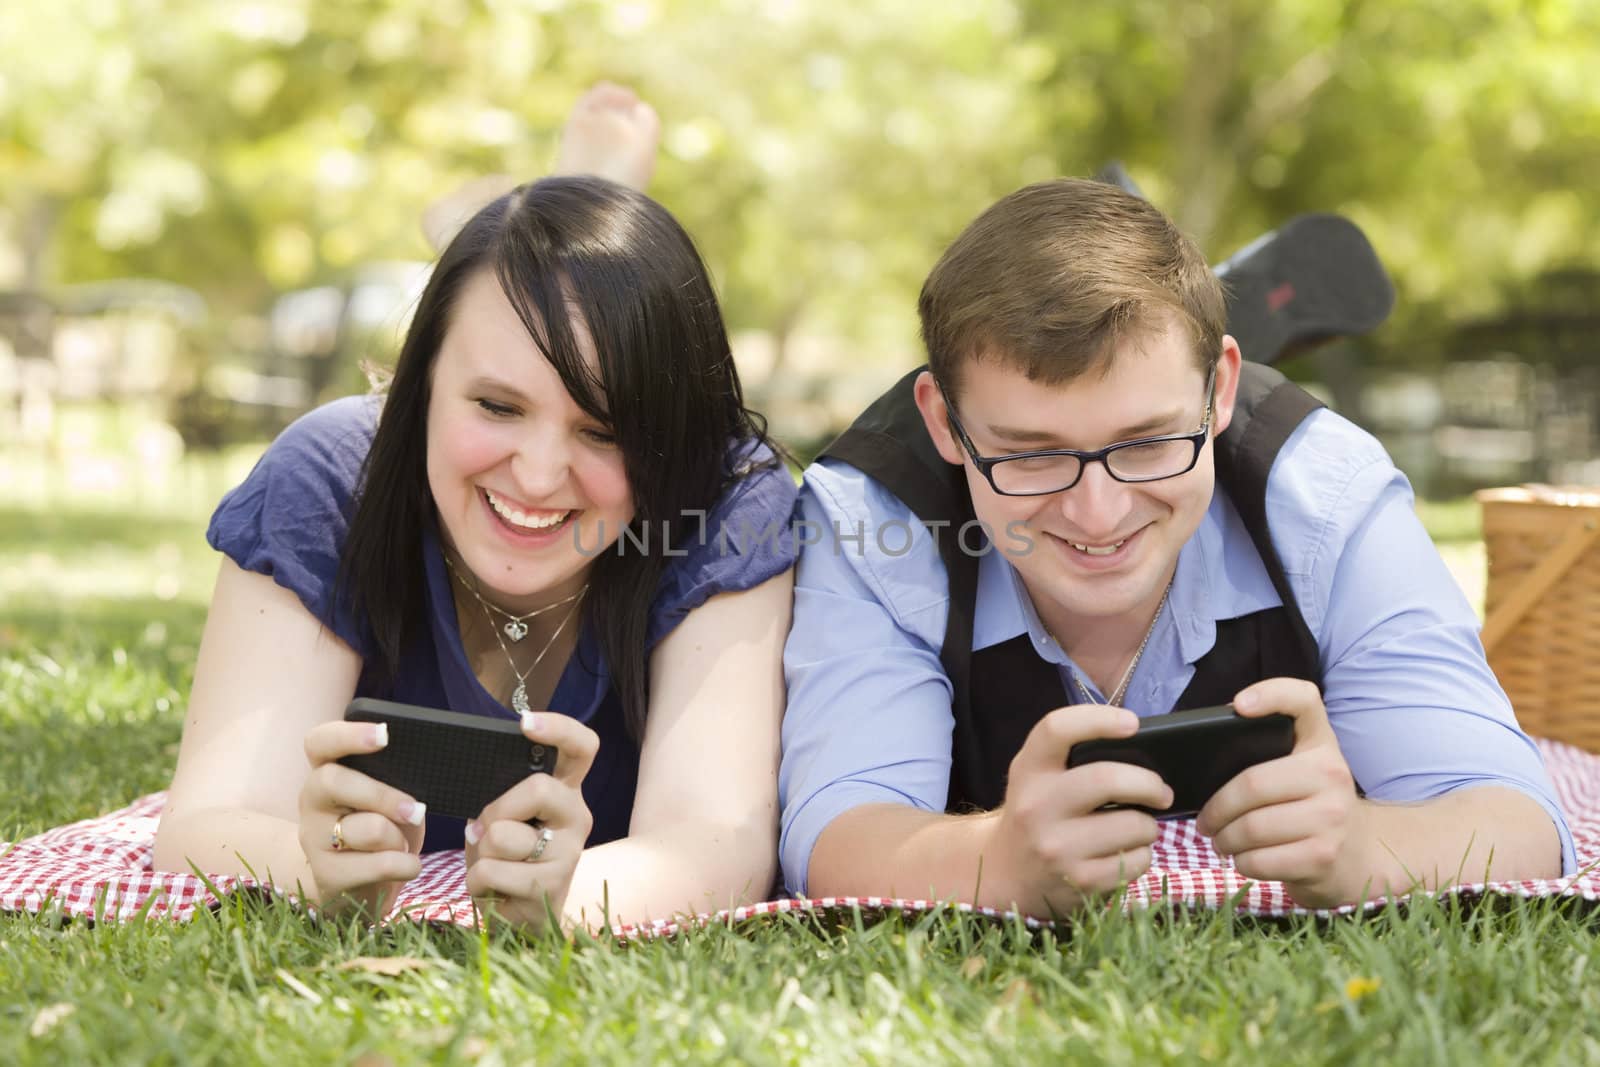 Attractive Young Couple at the Park Texting on Their Smart Phones Together.